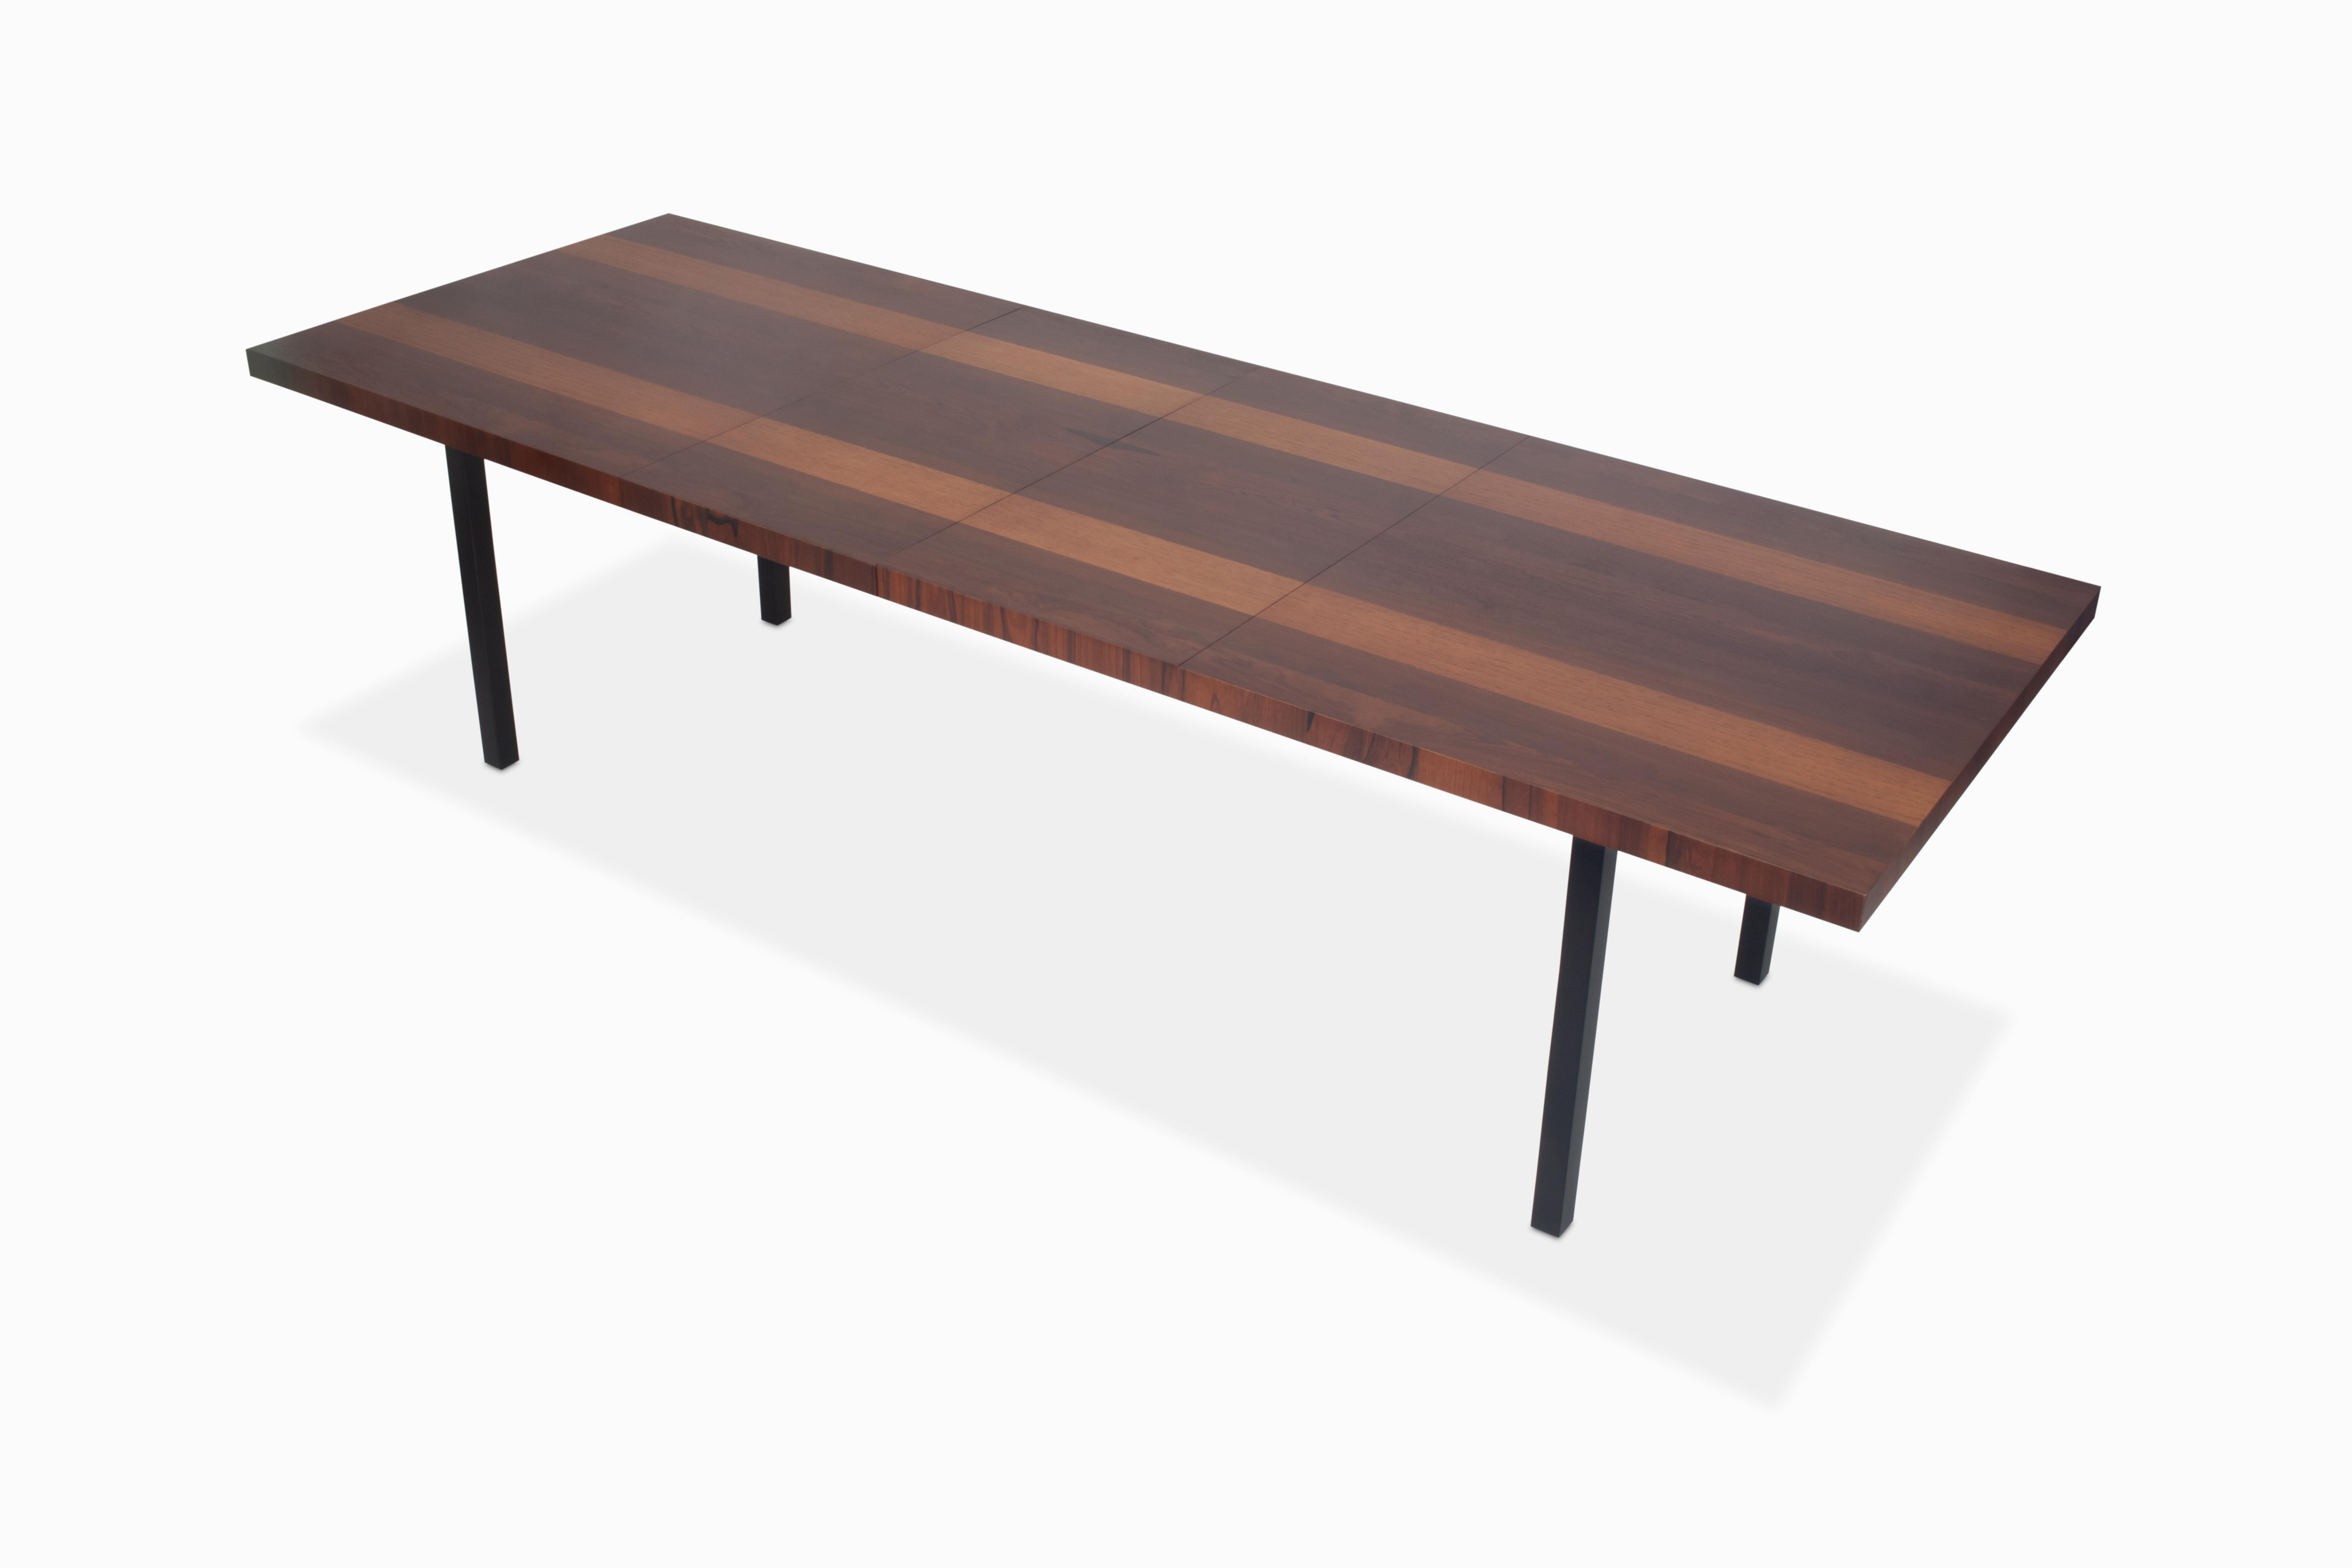 Here is a large multi-wood dining table designed by Milo Baughman for Directional. It is comprised of rosewood, walnut and ash veneers atop a very sturdy black lacquered base. Fully expanded, this table spans 112